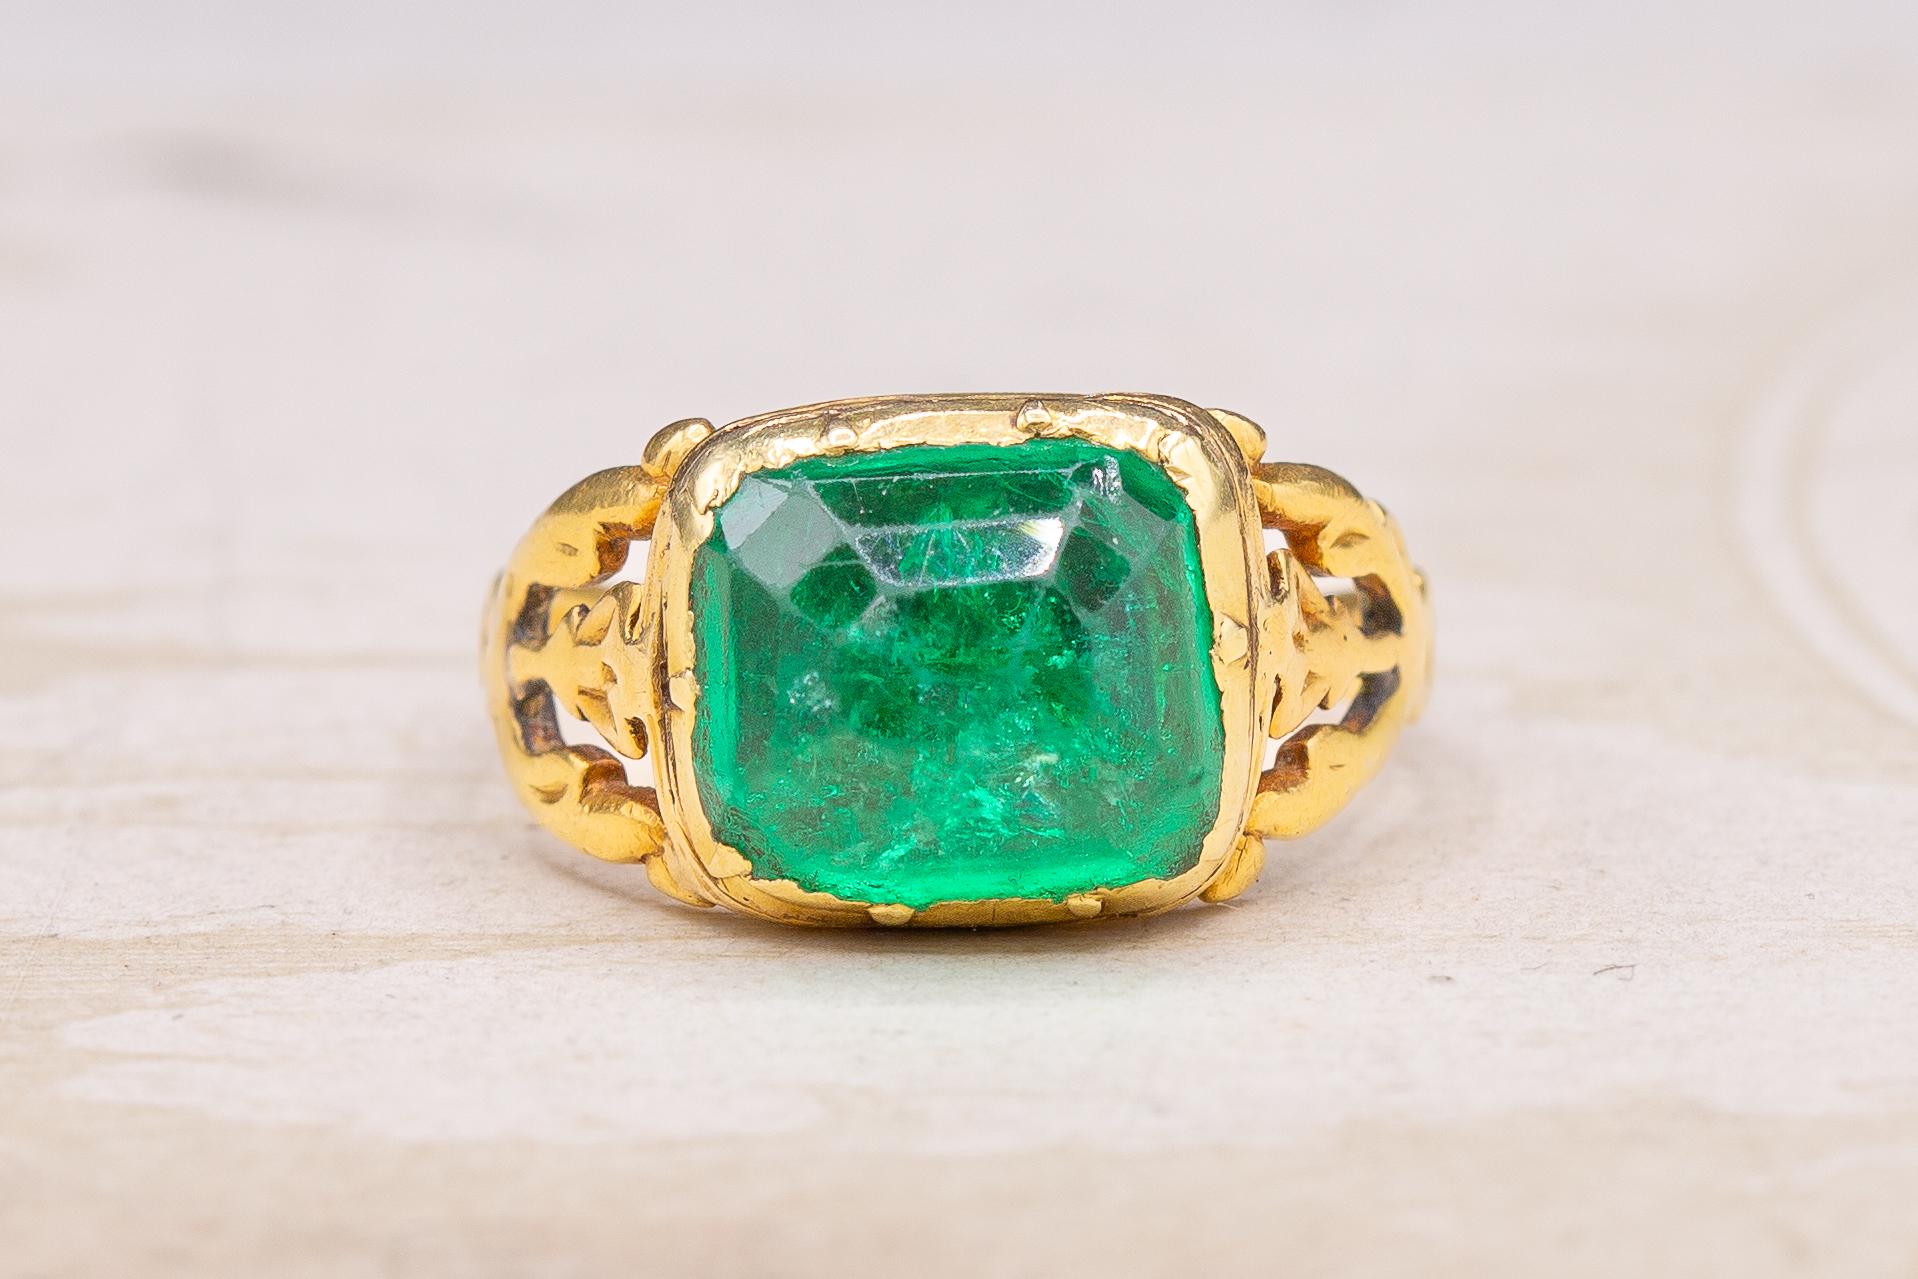 A scarce late 18th century high-karat gold and emerald ring, circa 1780. 

This superb gold ring is set with a large faceted natural emerald gemstone, approximately 5cts in weight. The emerald is of Colombian origin, with no colour enhancement and 